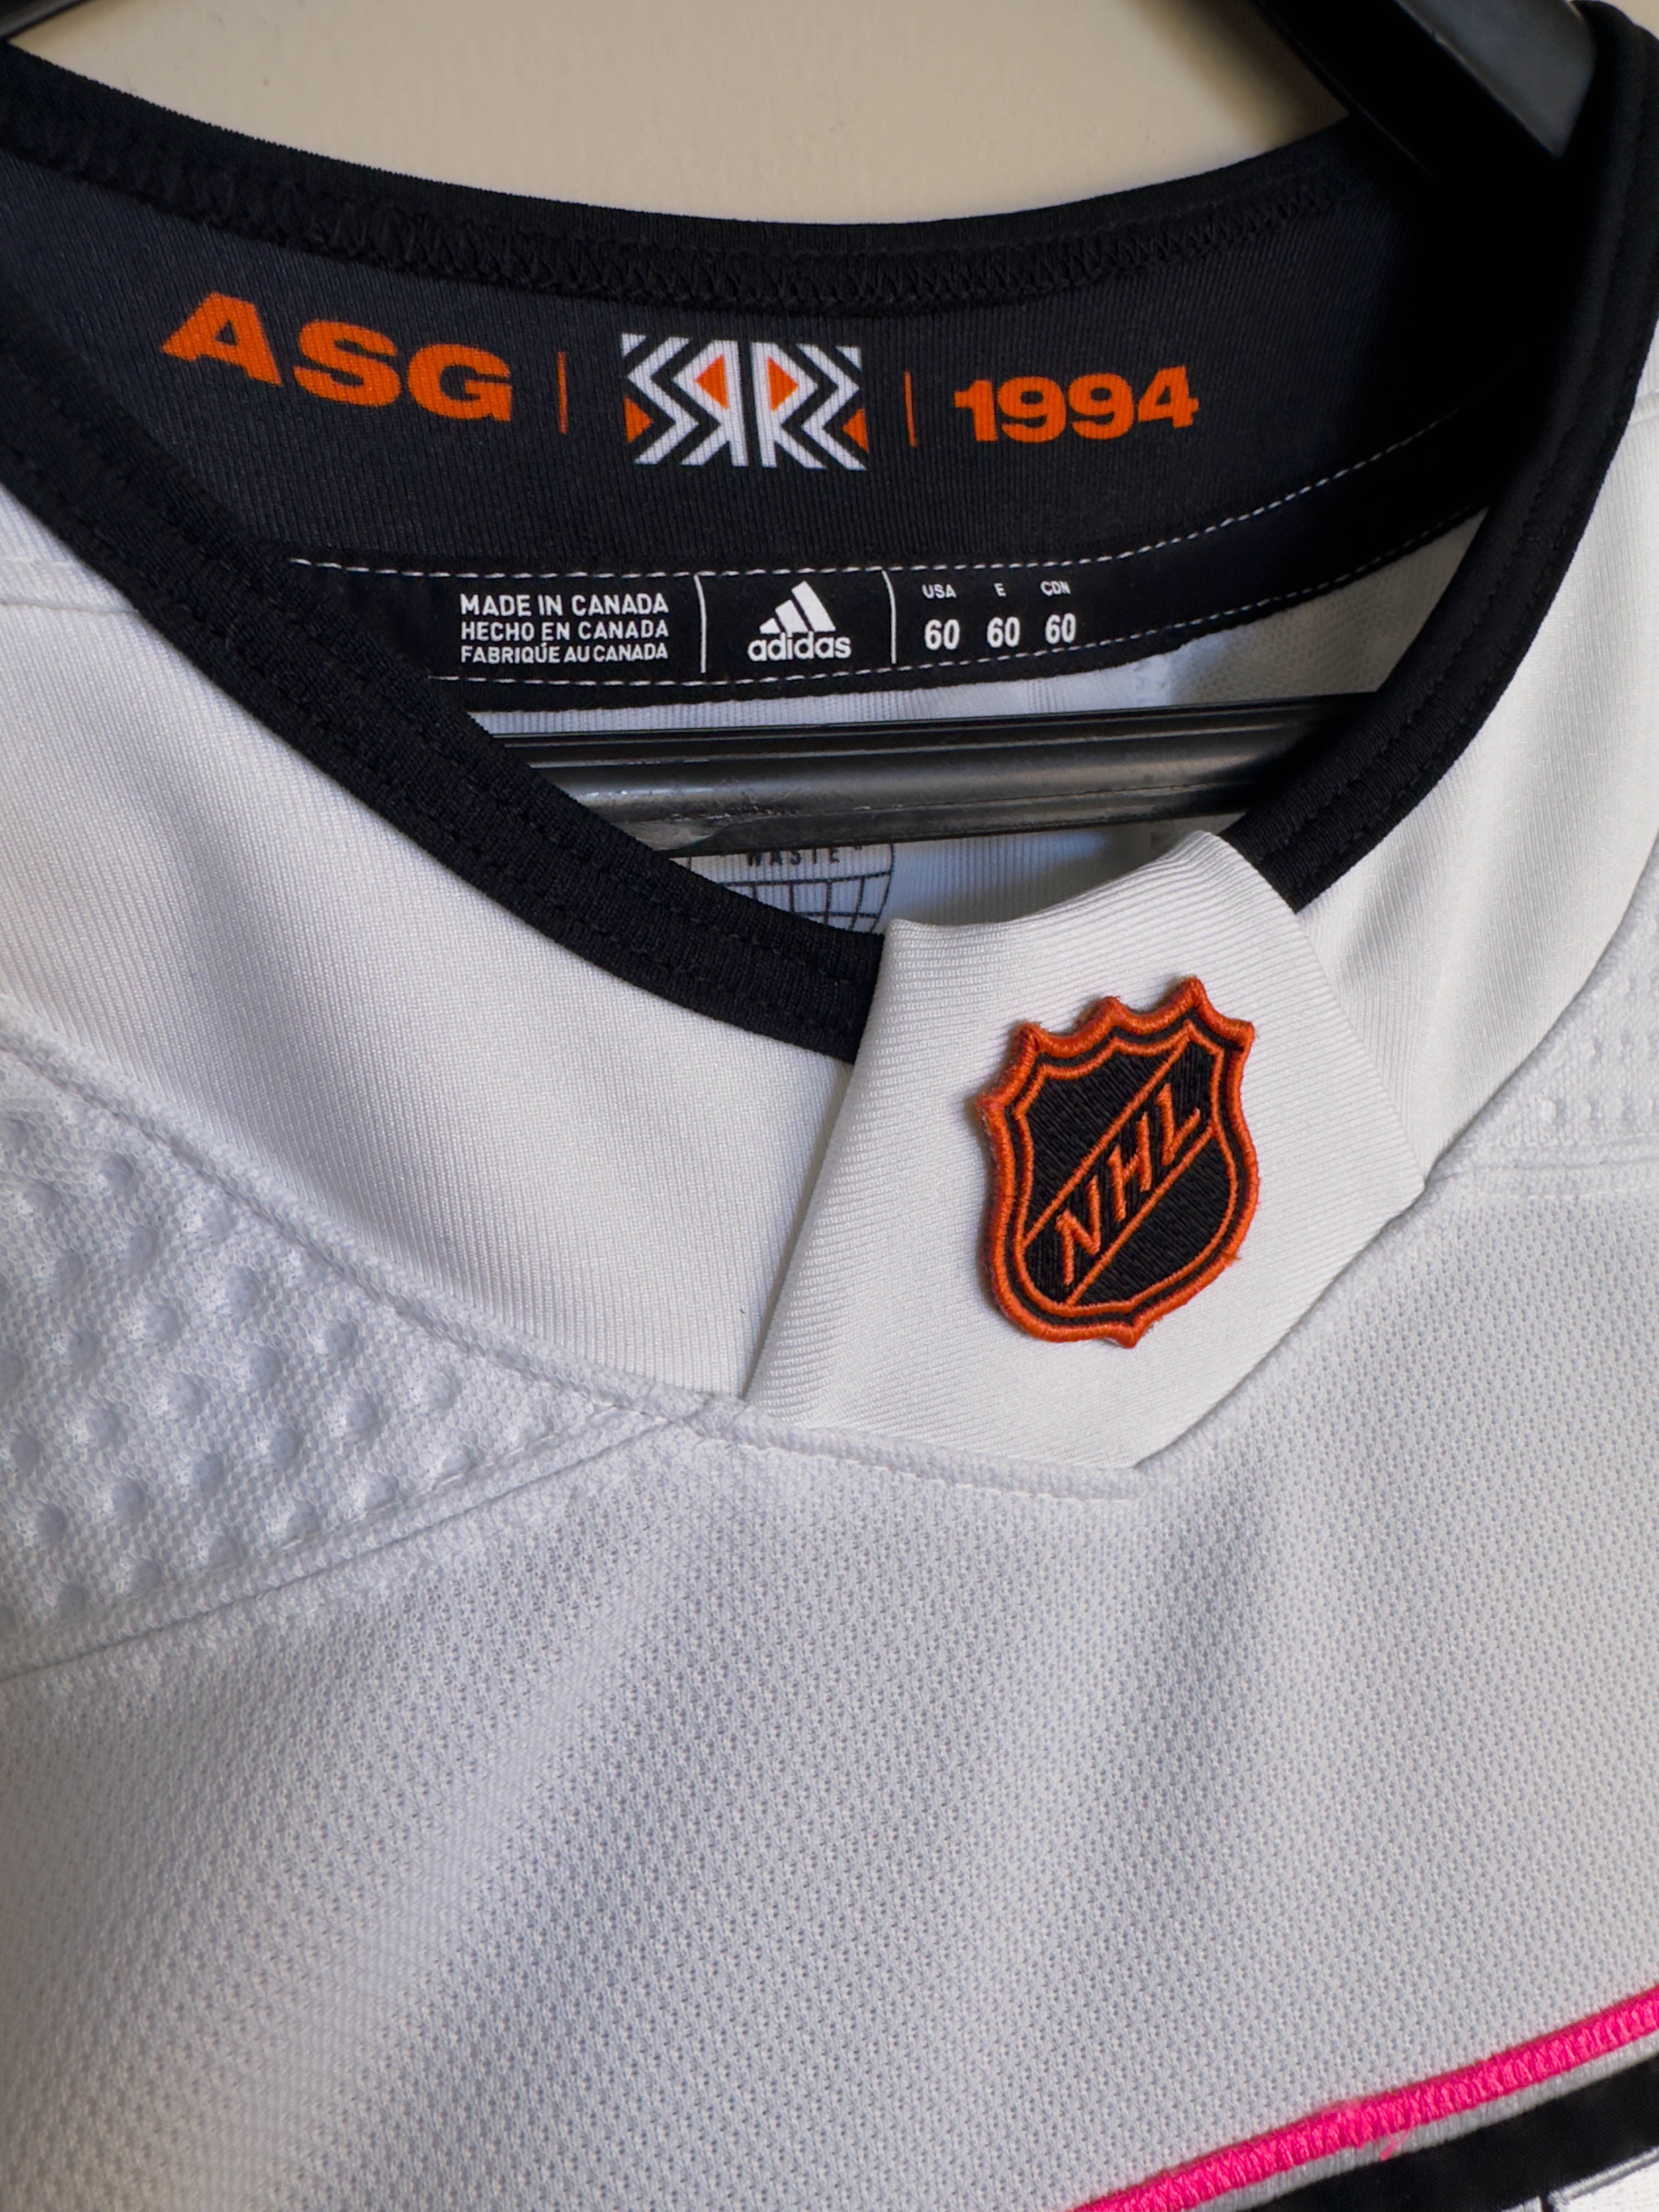 Adidas Authentic 2022 NHL All Star Jersey Hockey - Eastern Conference - Adult - Away/White - M (50)